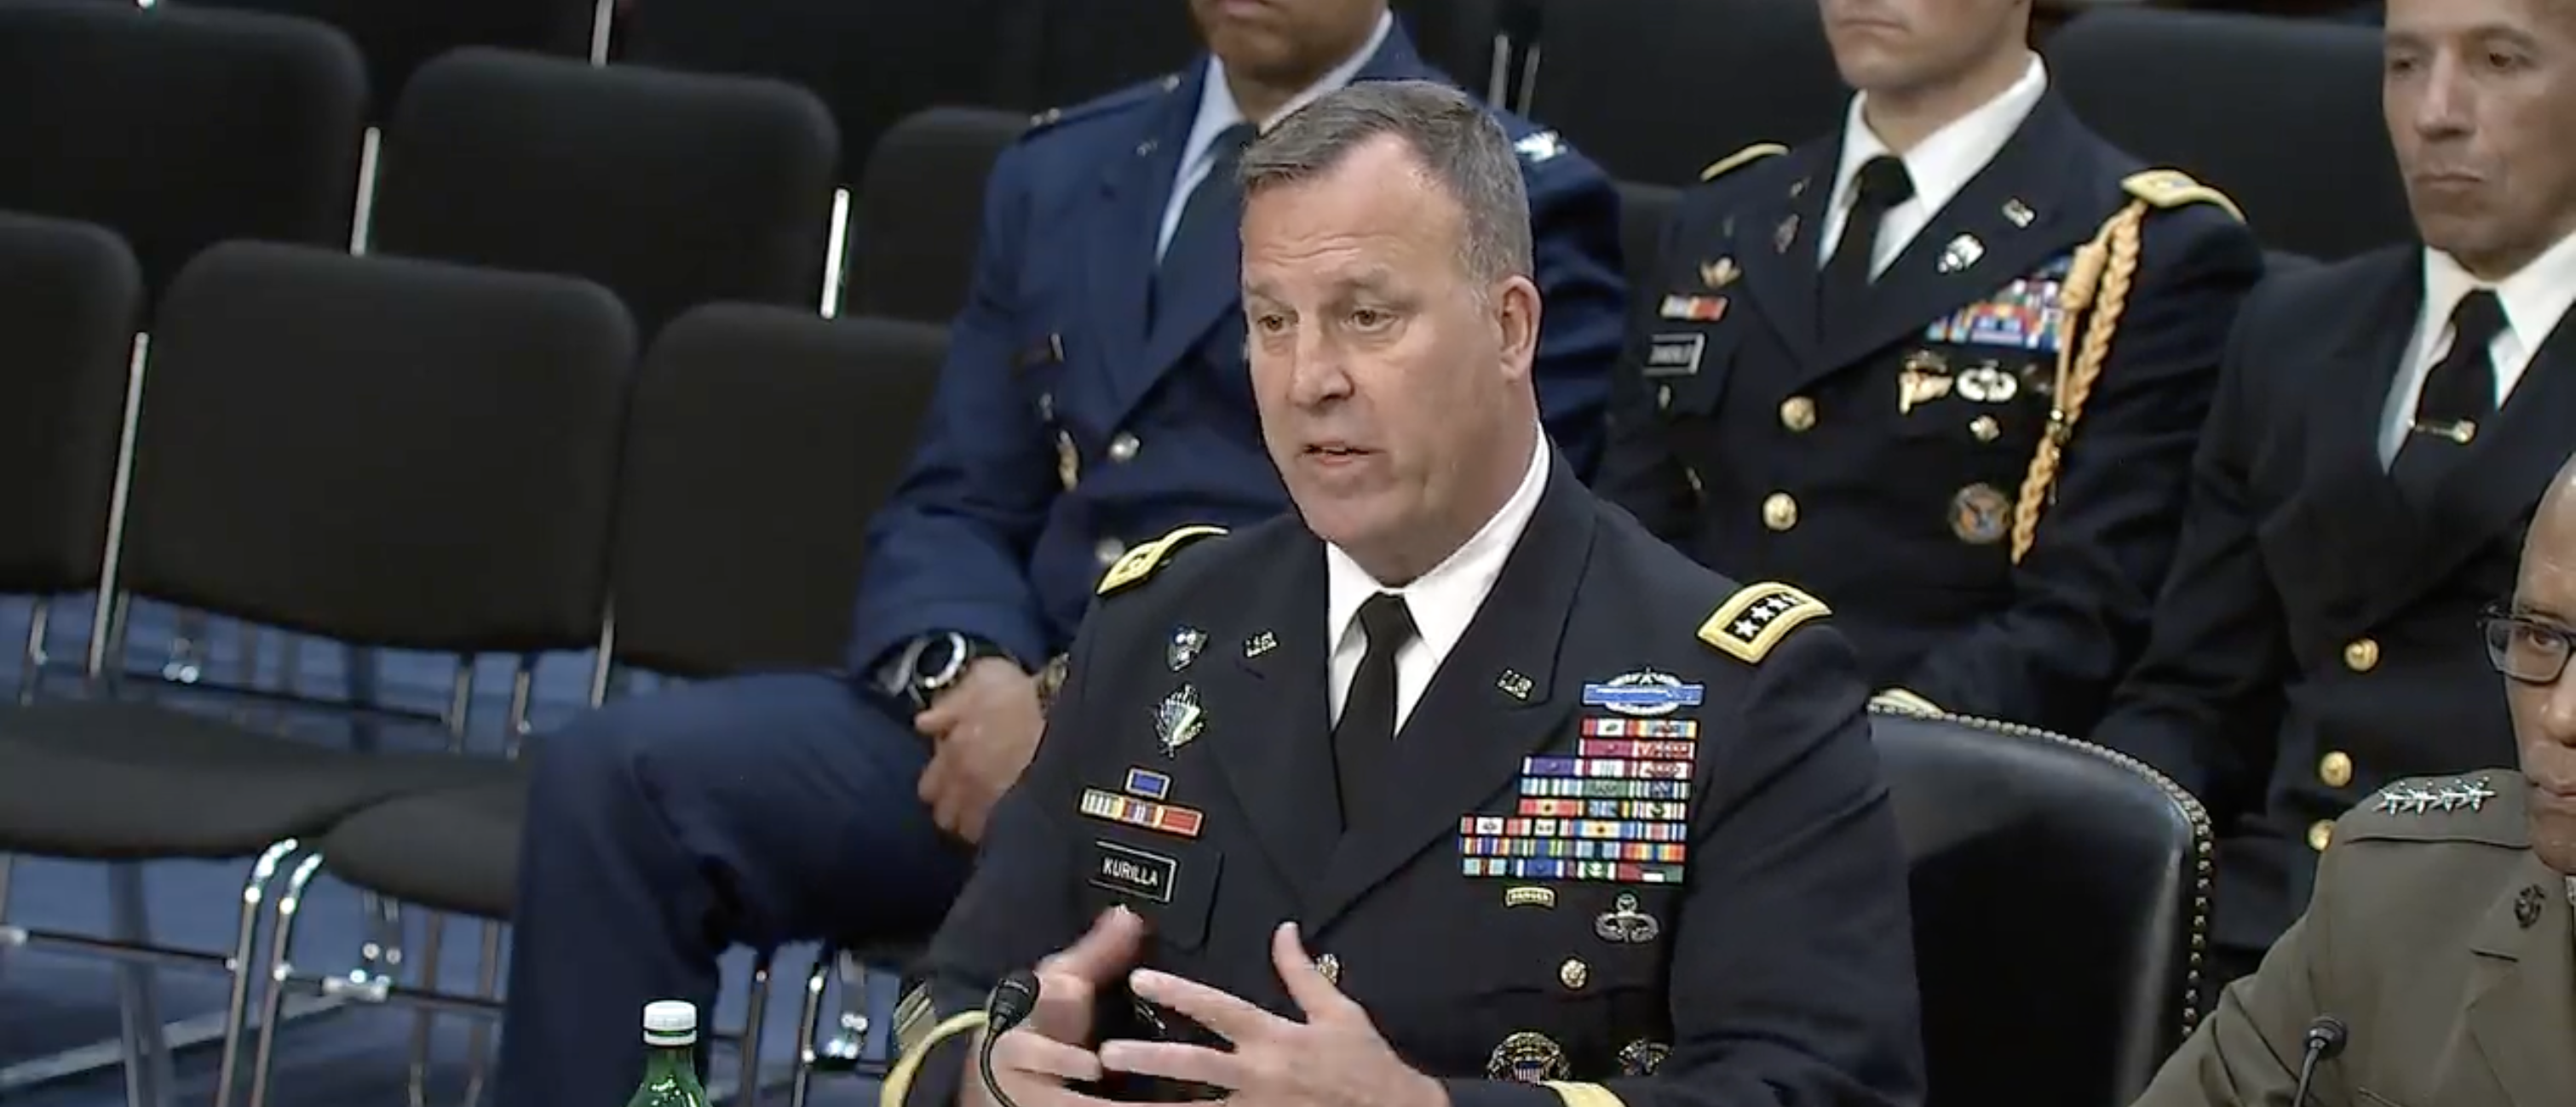 US Troops Had Multiple Close Calls In Drone Attacks By Iran-Backed Militias, General Says